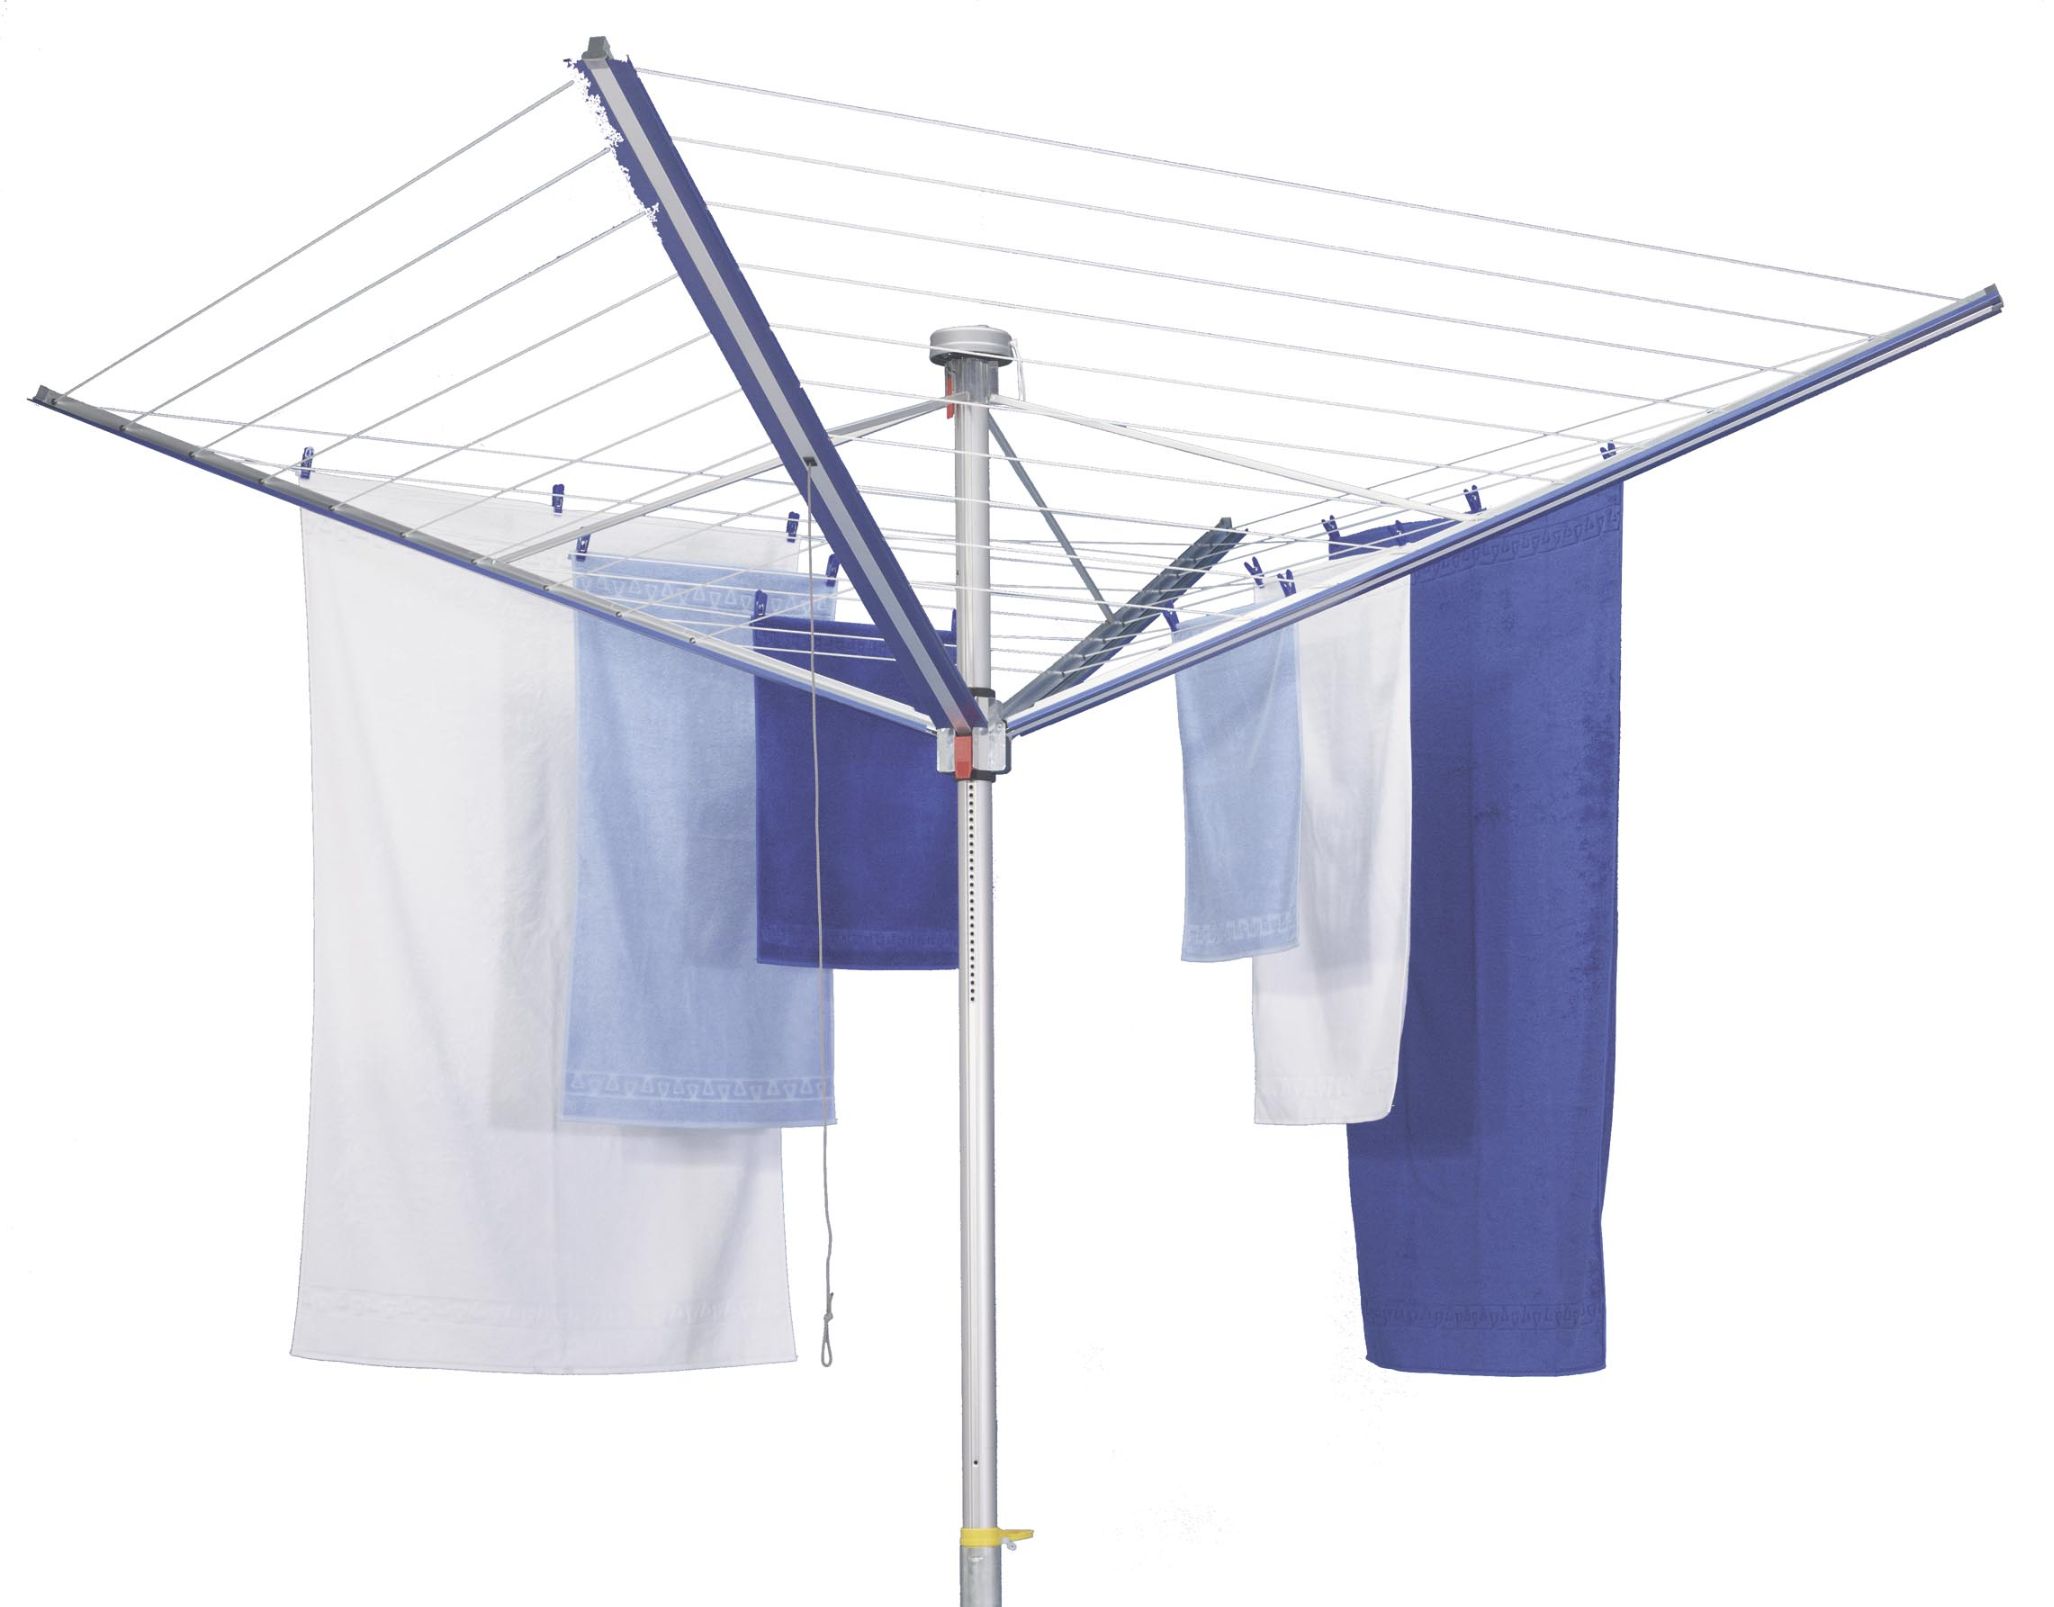 Stewi First Lady Rotary Clothes Dryer - Swiss Made!